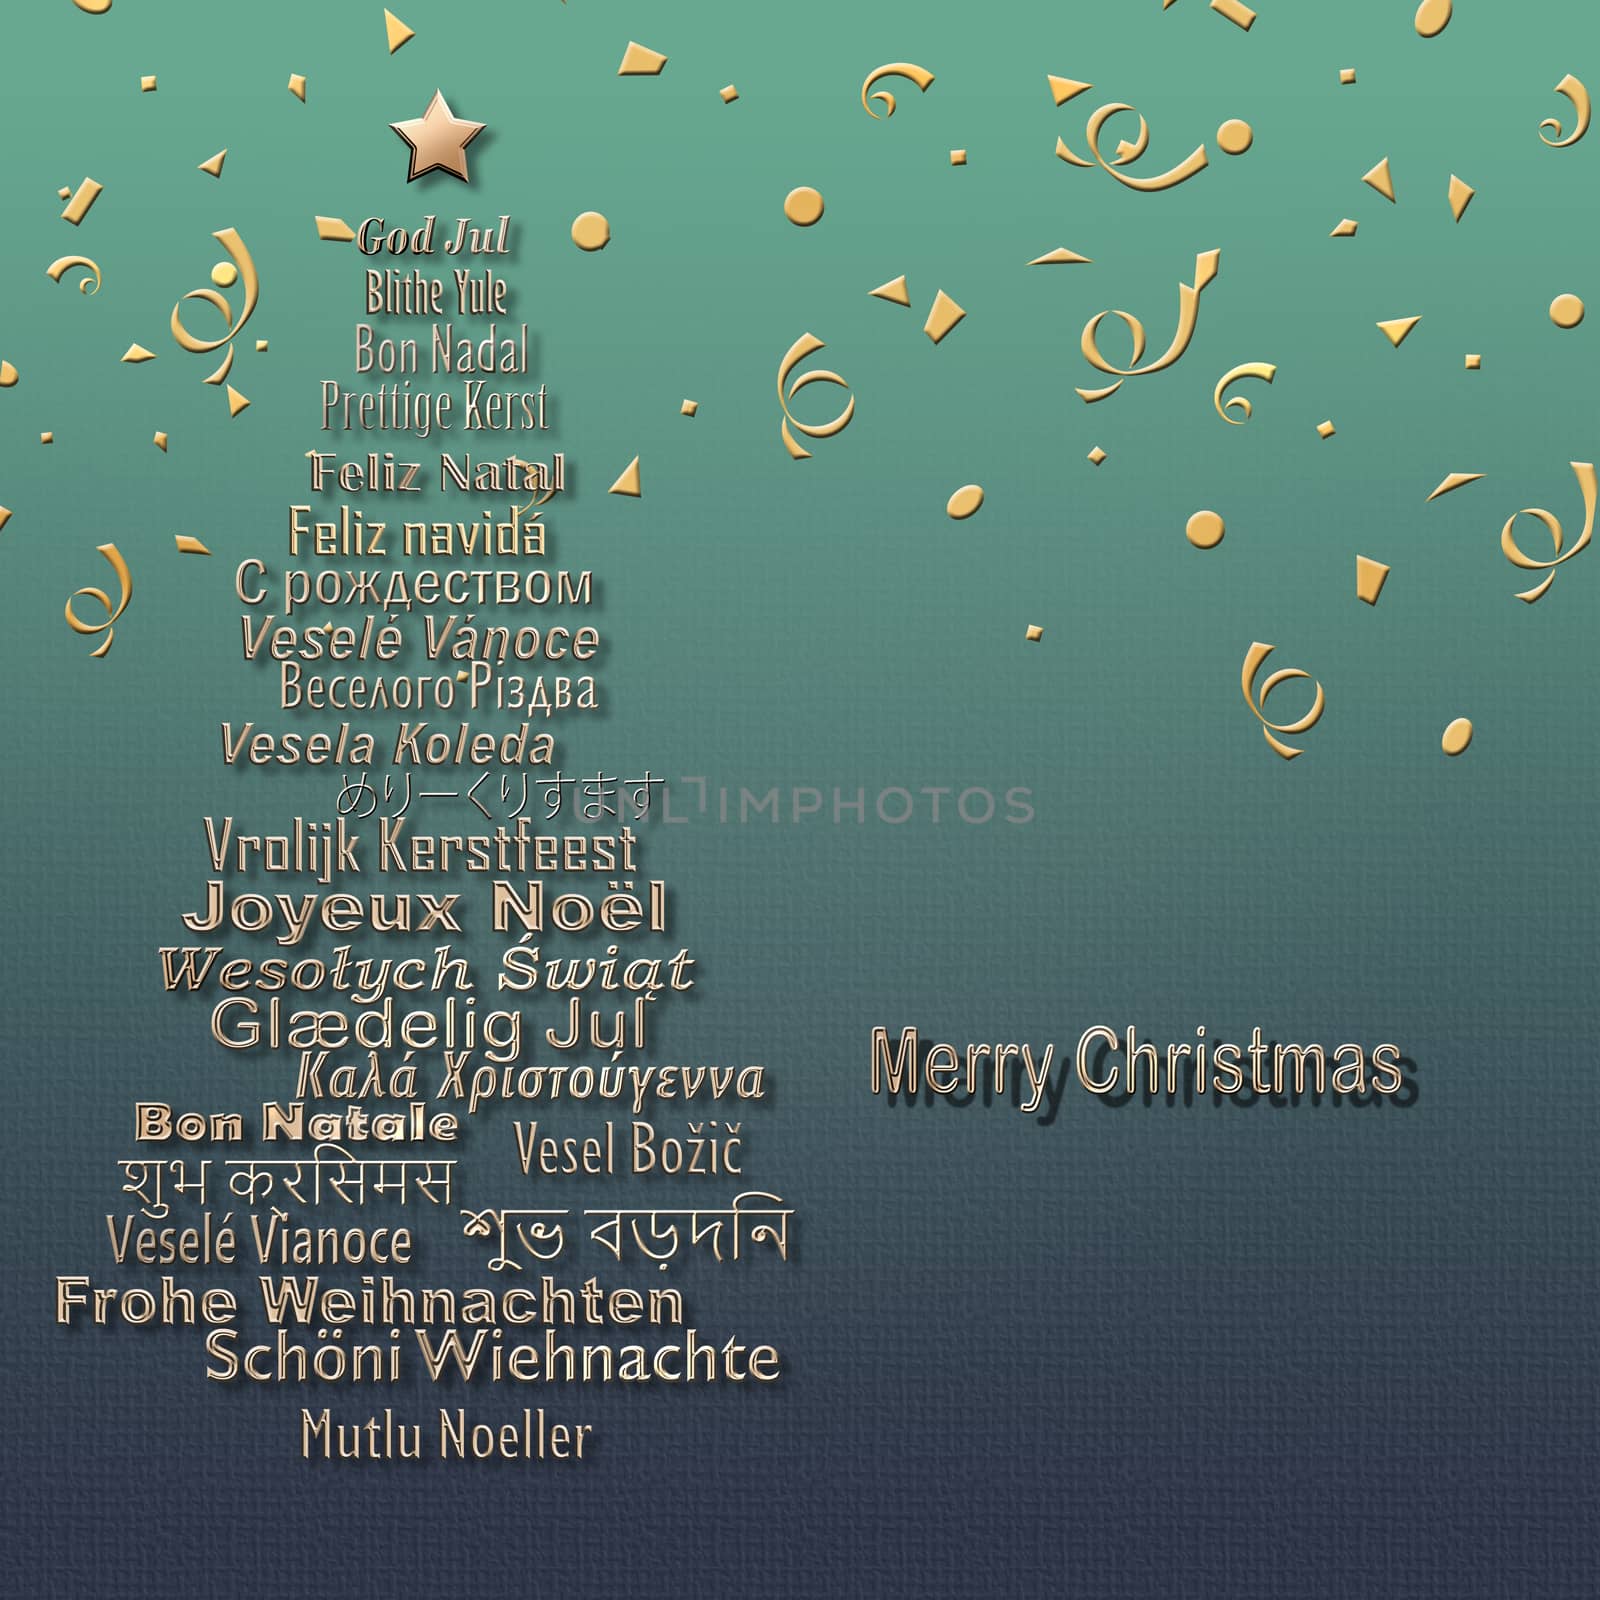 Merry Christmas card In Different European, Eastern European, Hindi, Bengali, Indian, Japanese Languages forming Christmas Tree and gold cogetti on pastel green background. 3D illustration